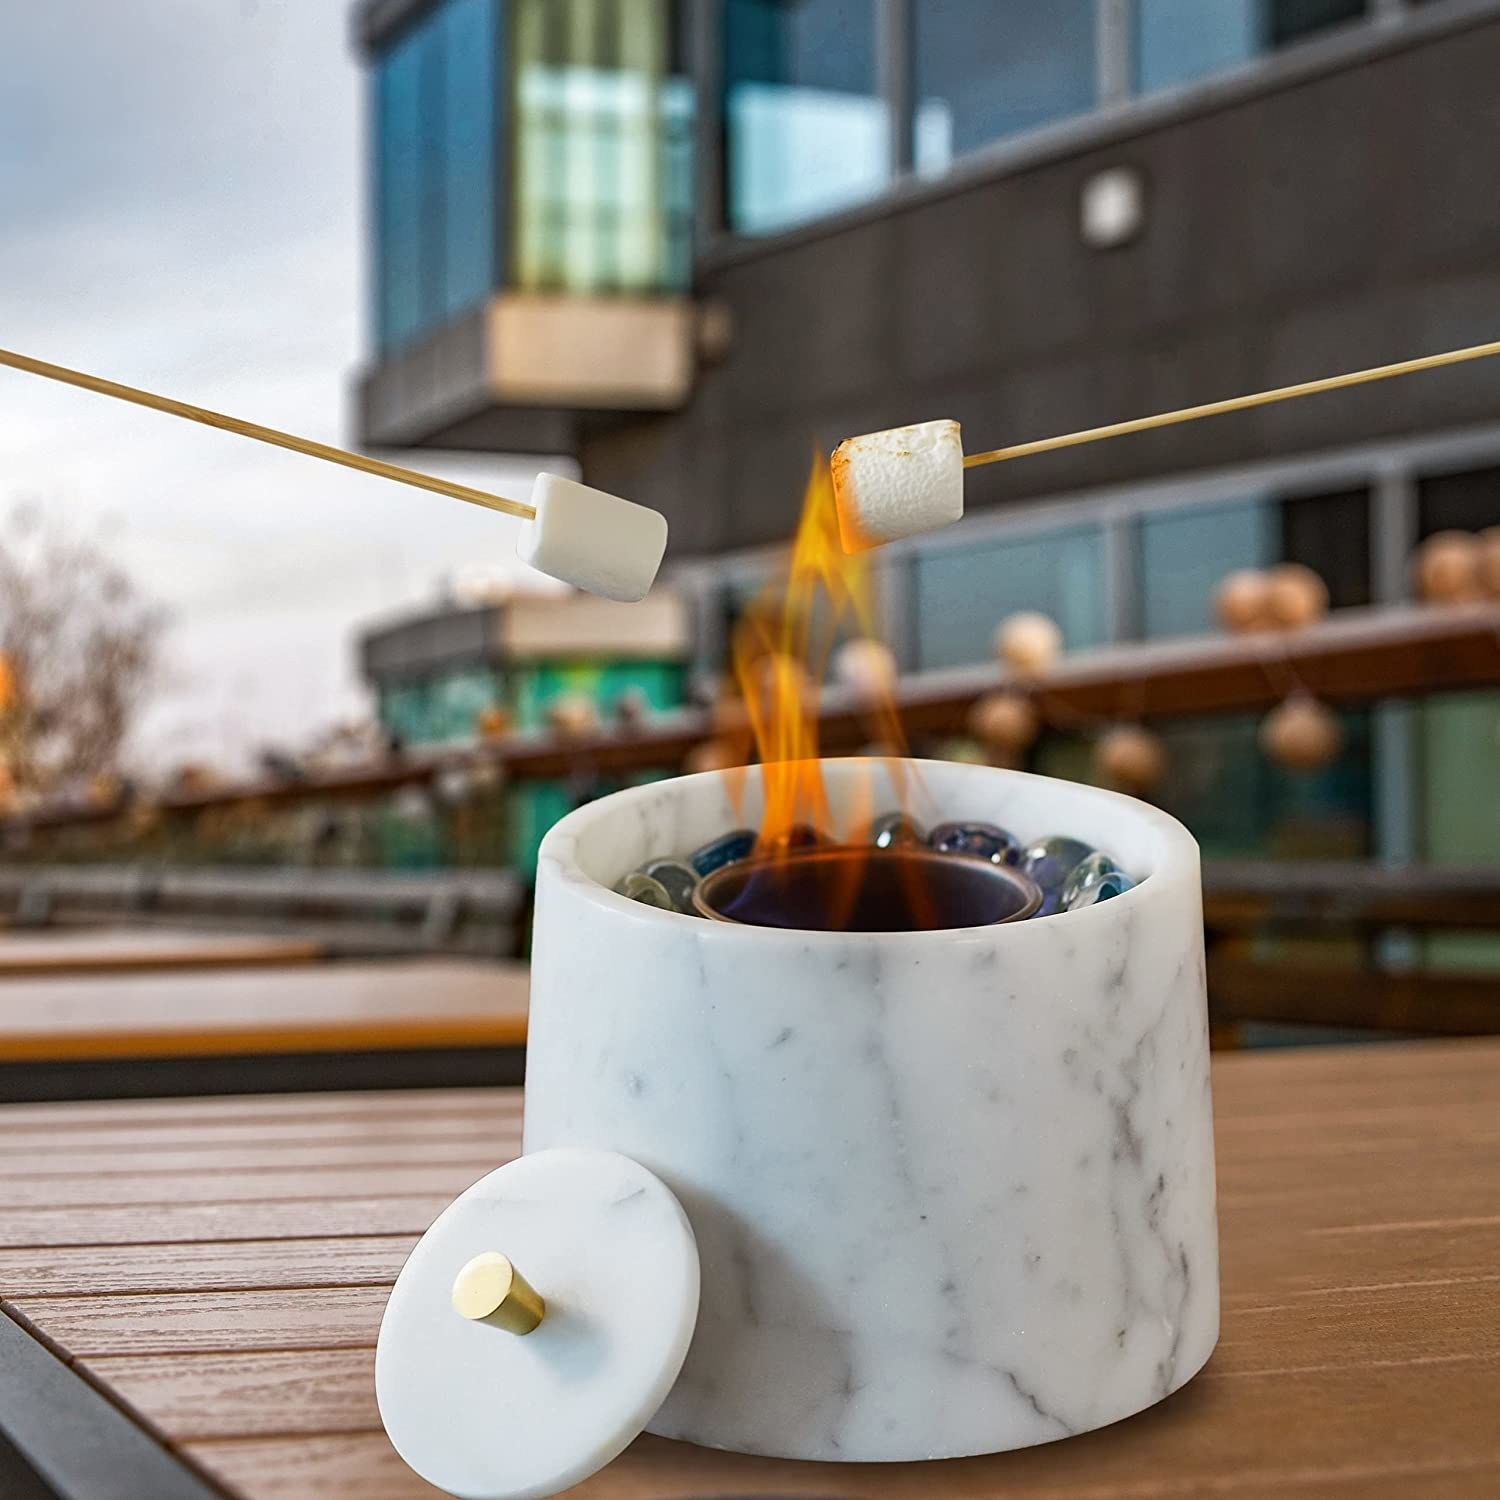 people using the mini fire pit to toast marshmallows